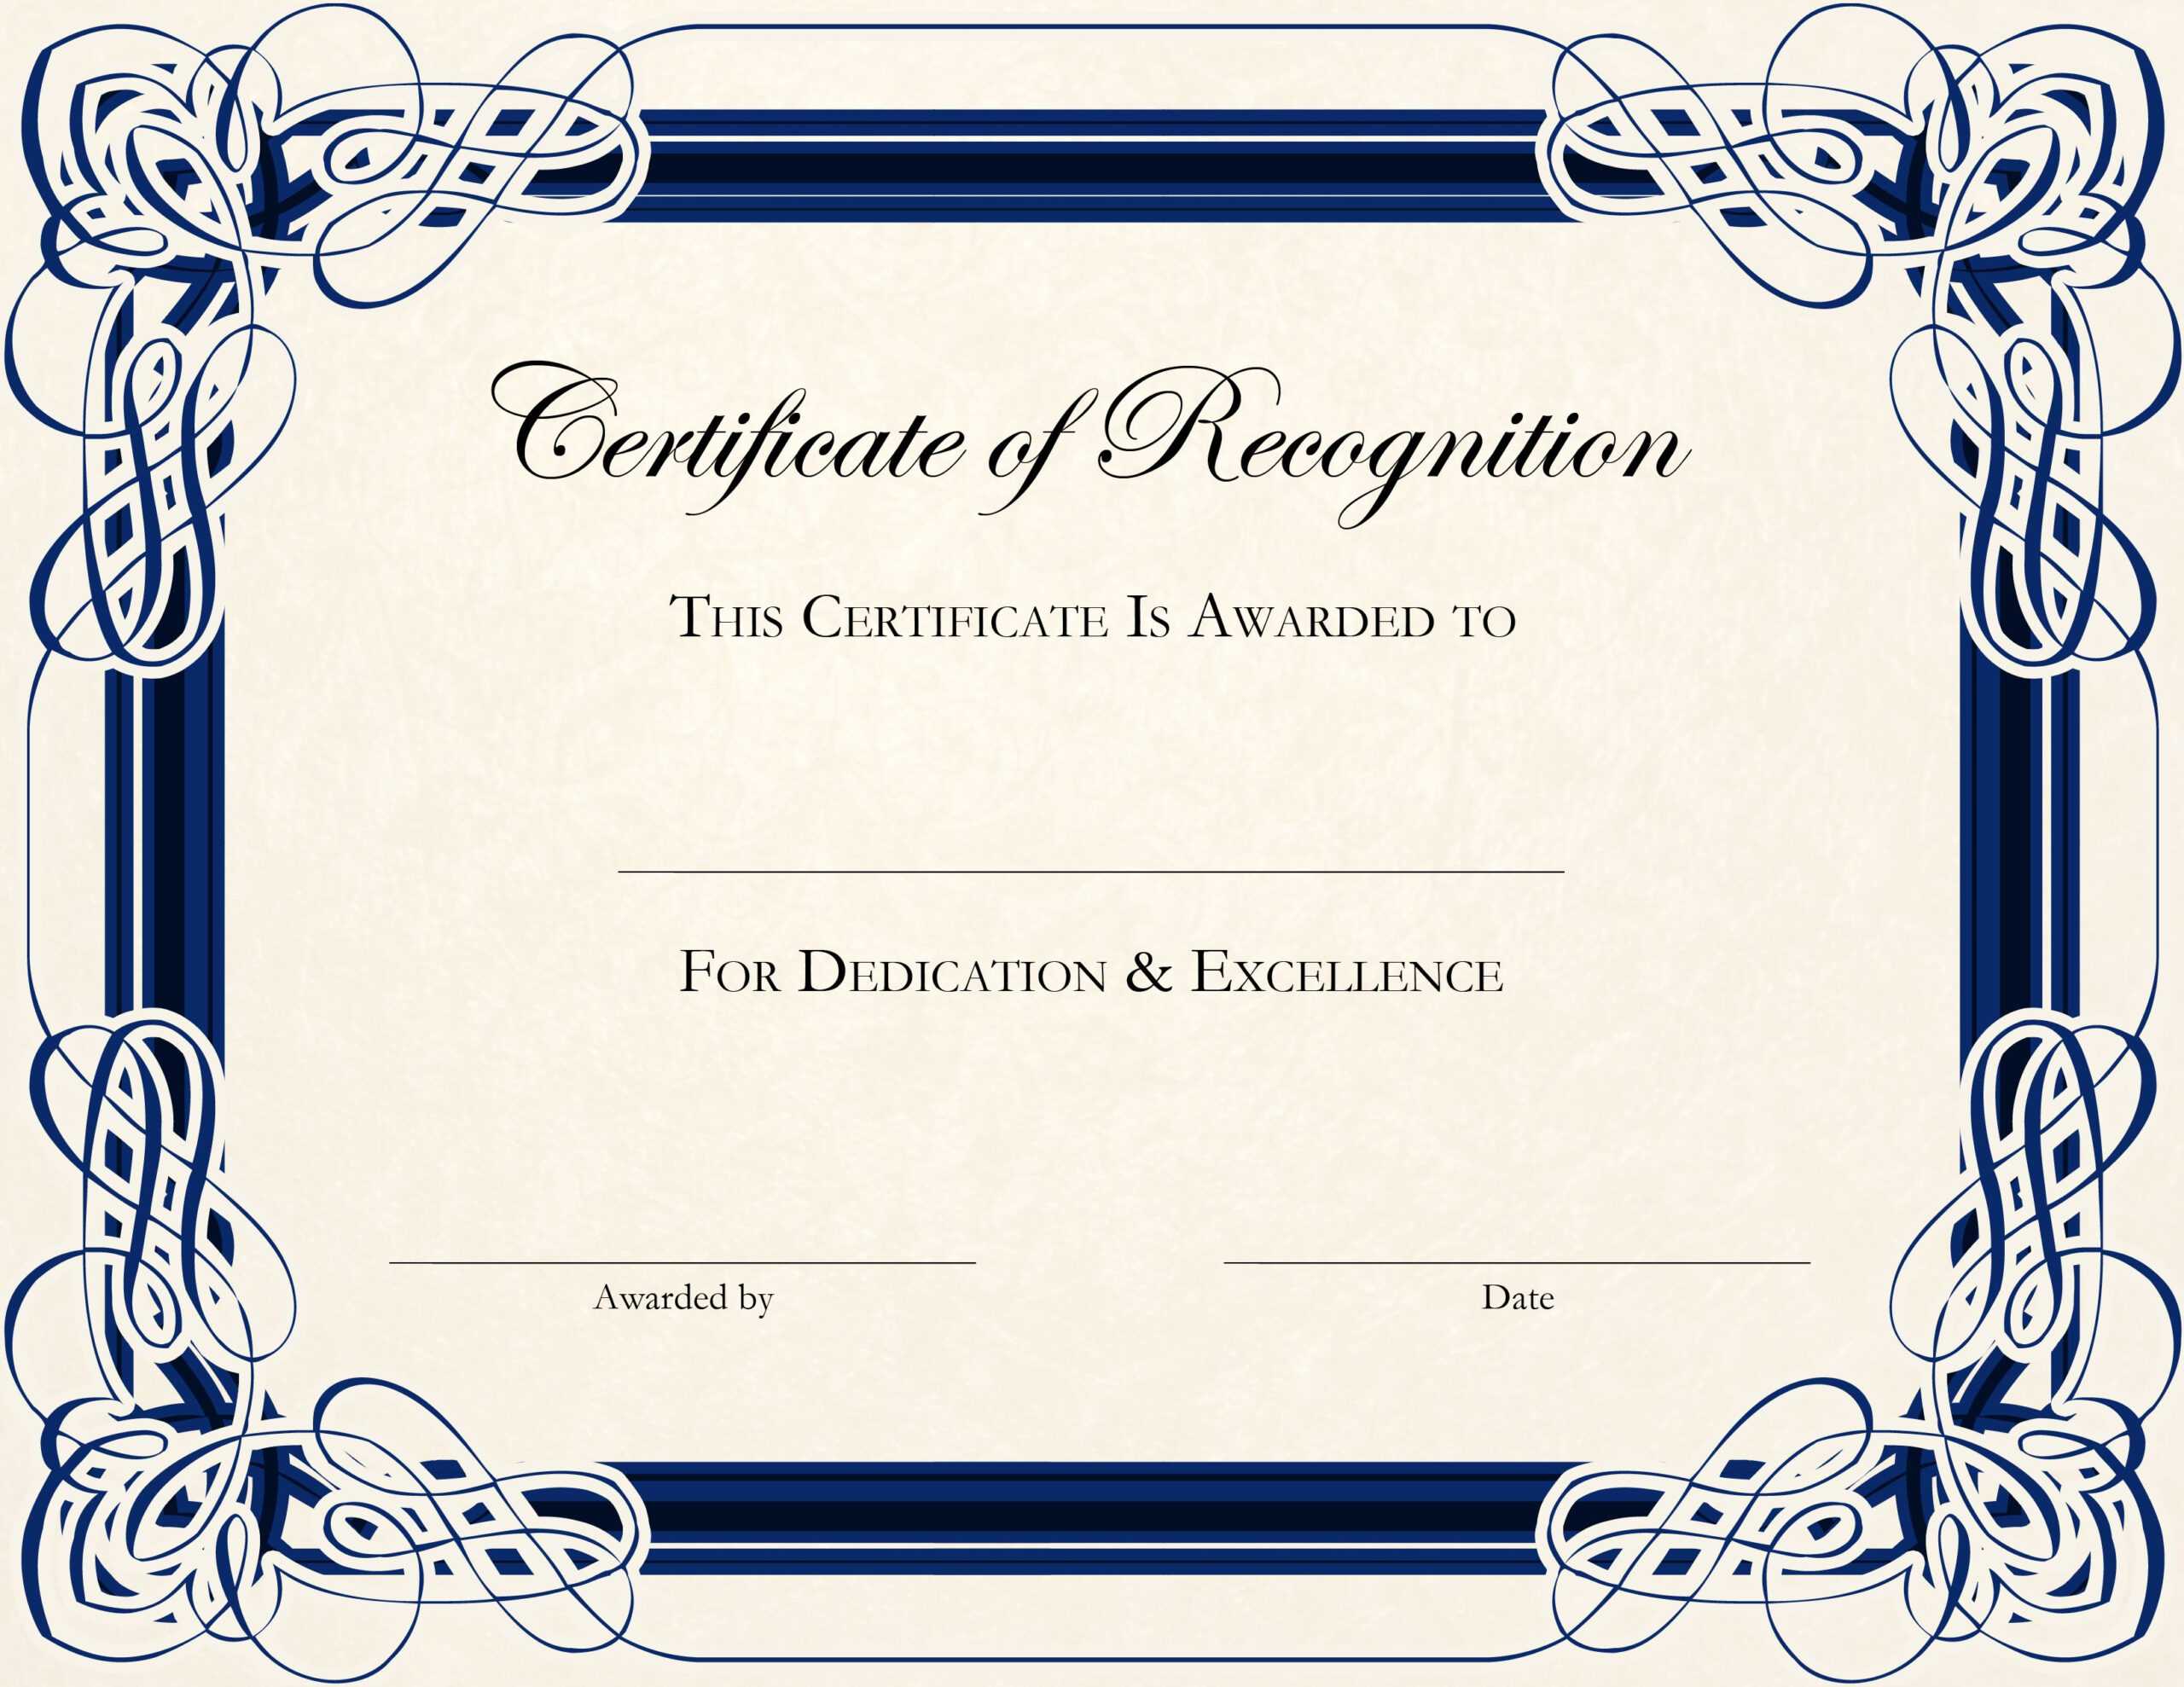 Certificate Of Appreciation Template Word Doc - Calep With Regard To Certificate Of Excellence Template Word